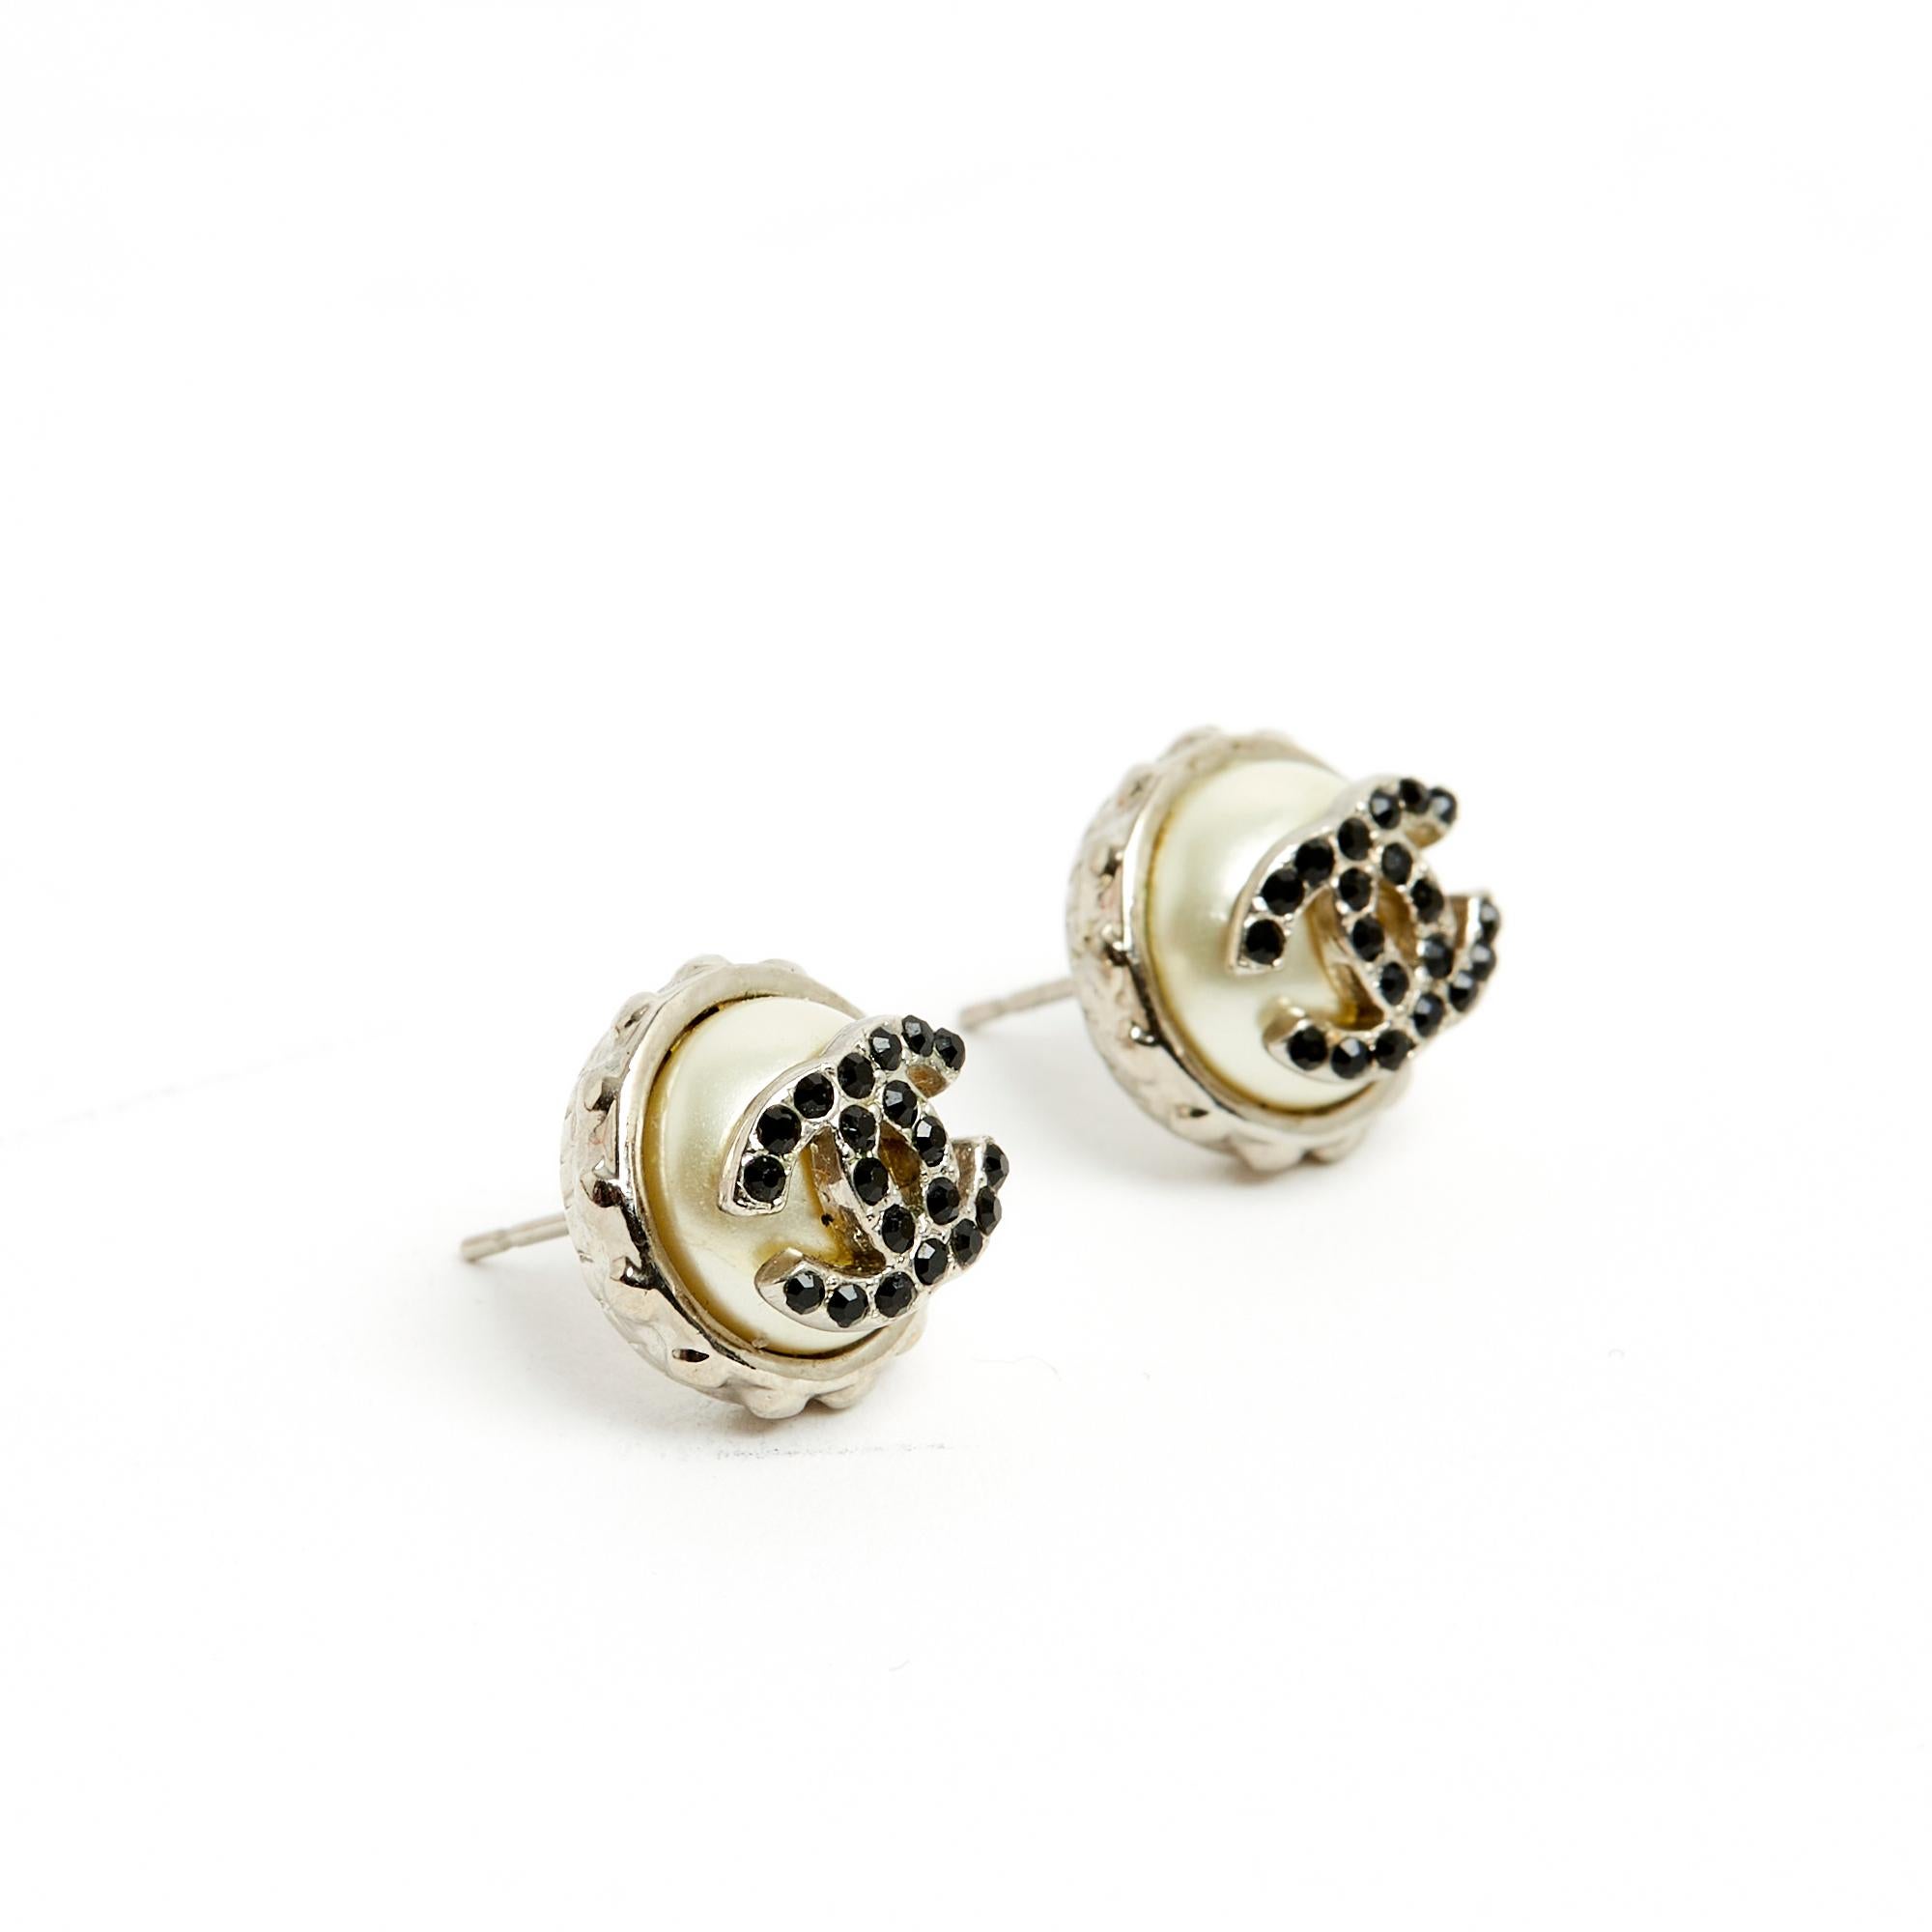 Chanel small stud earrings in silver metal composed of a half pearl topped with a small CC logo inlaid with black rhinestones. Diameter 1.35 cm. The earrings are delivered without original packaging and invoice, they are in very good condition, chic